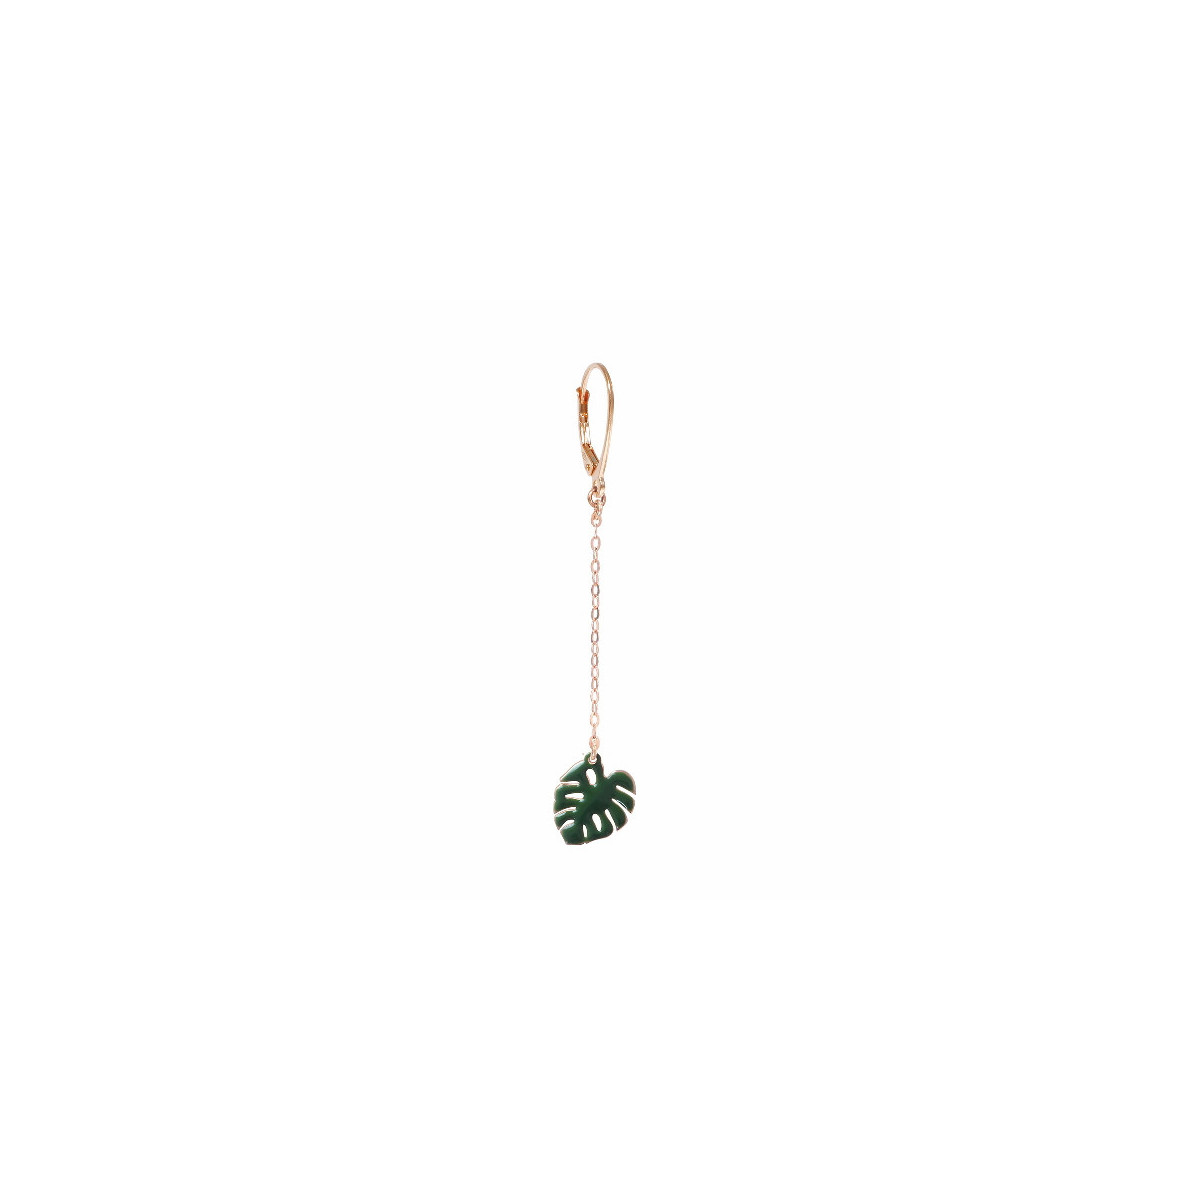 SINGLE HOOK CLASP EARRING WITH PENDANT GREEN MONSTERA LEAF